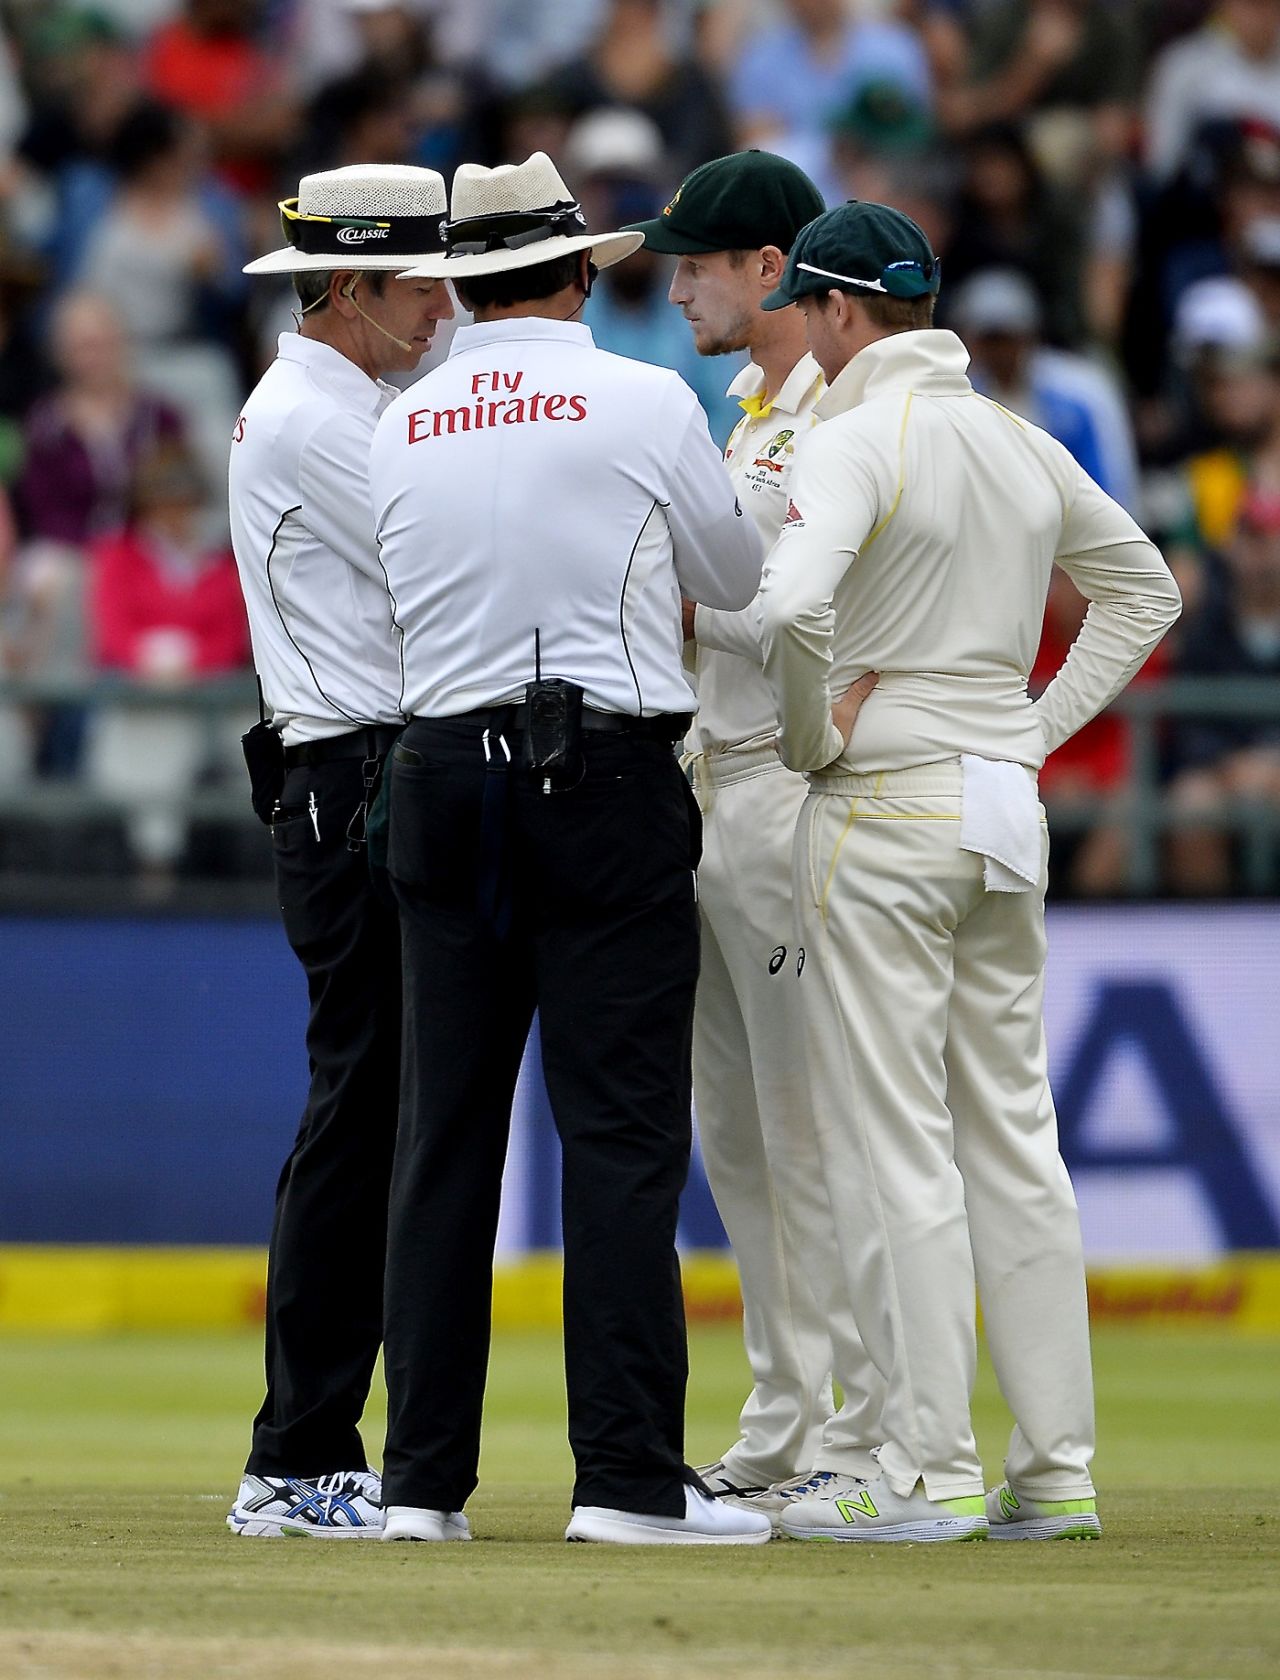 Steven Smith joined the conversation as umpires spoke to Cameron Bancroft, South Africa v Australia, 3rd Test, Cape Town, 3rd day, March 24, 2018